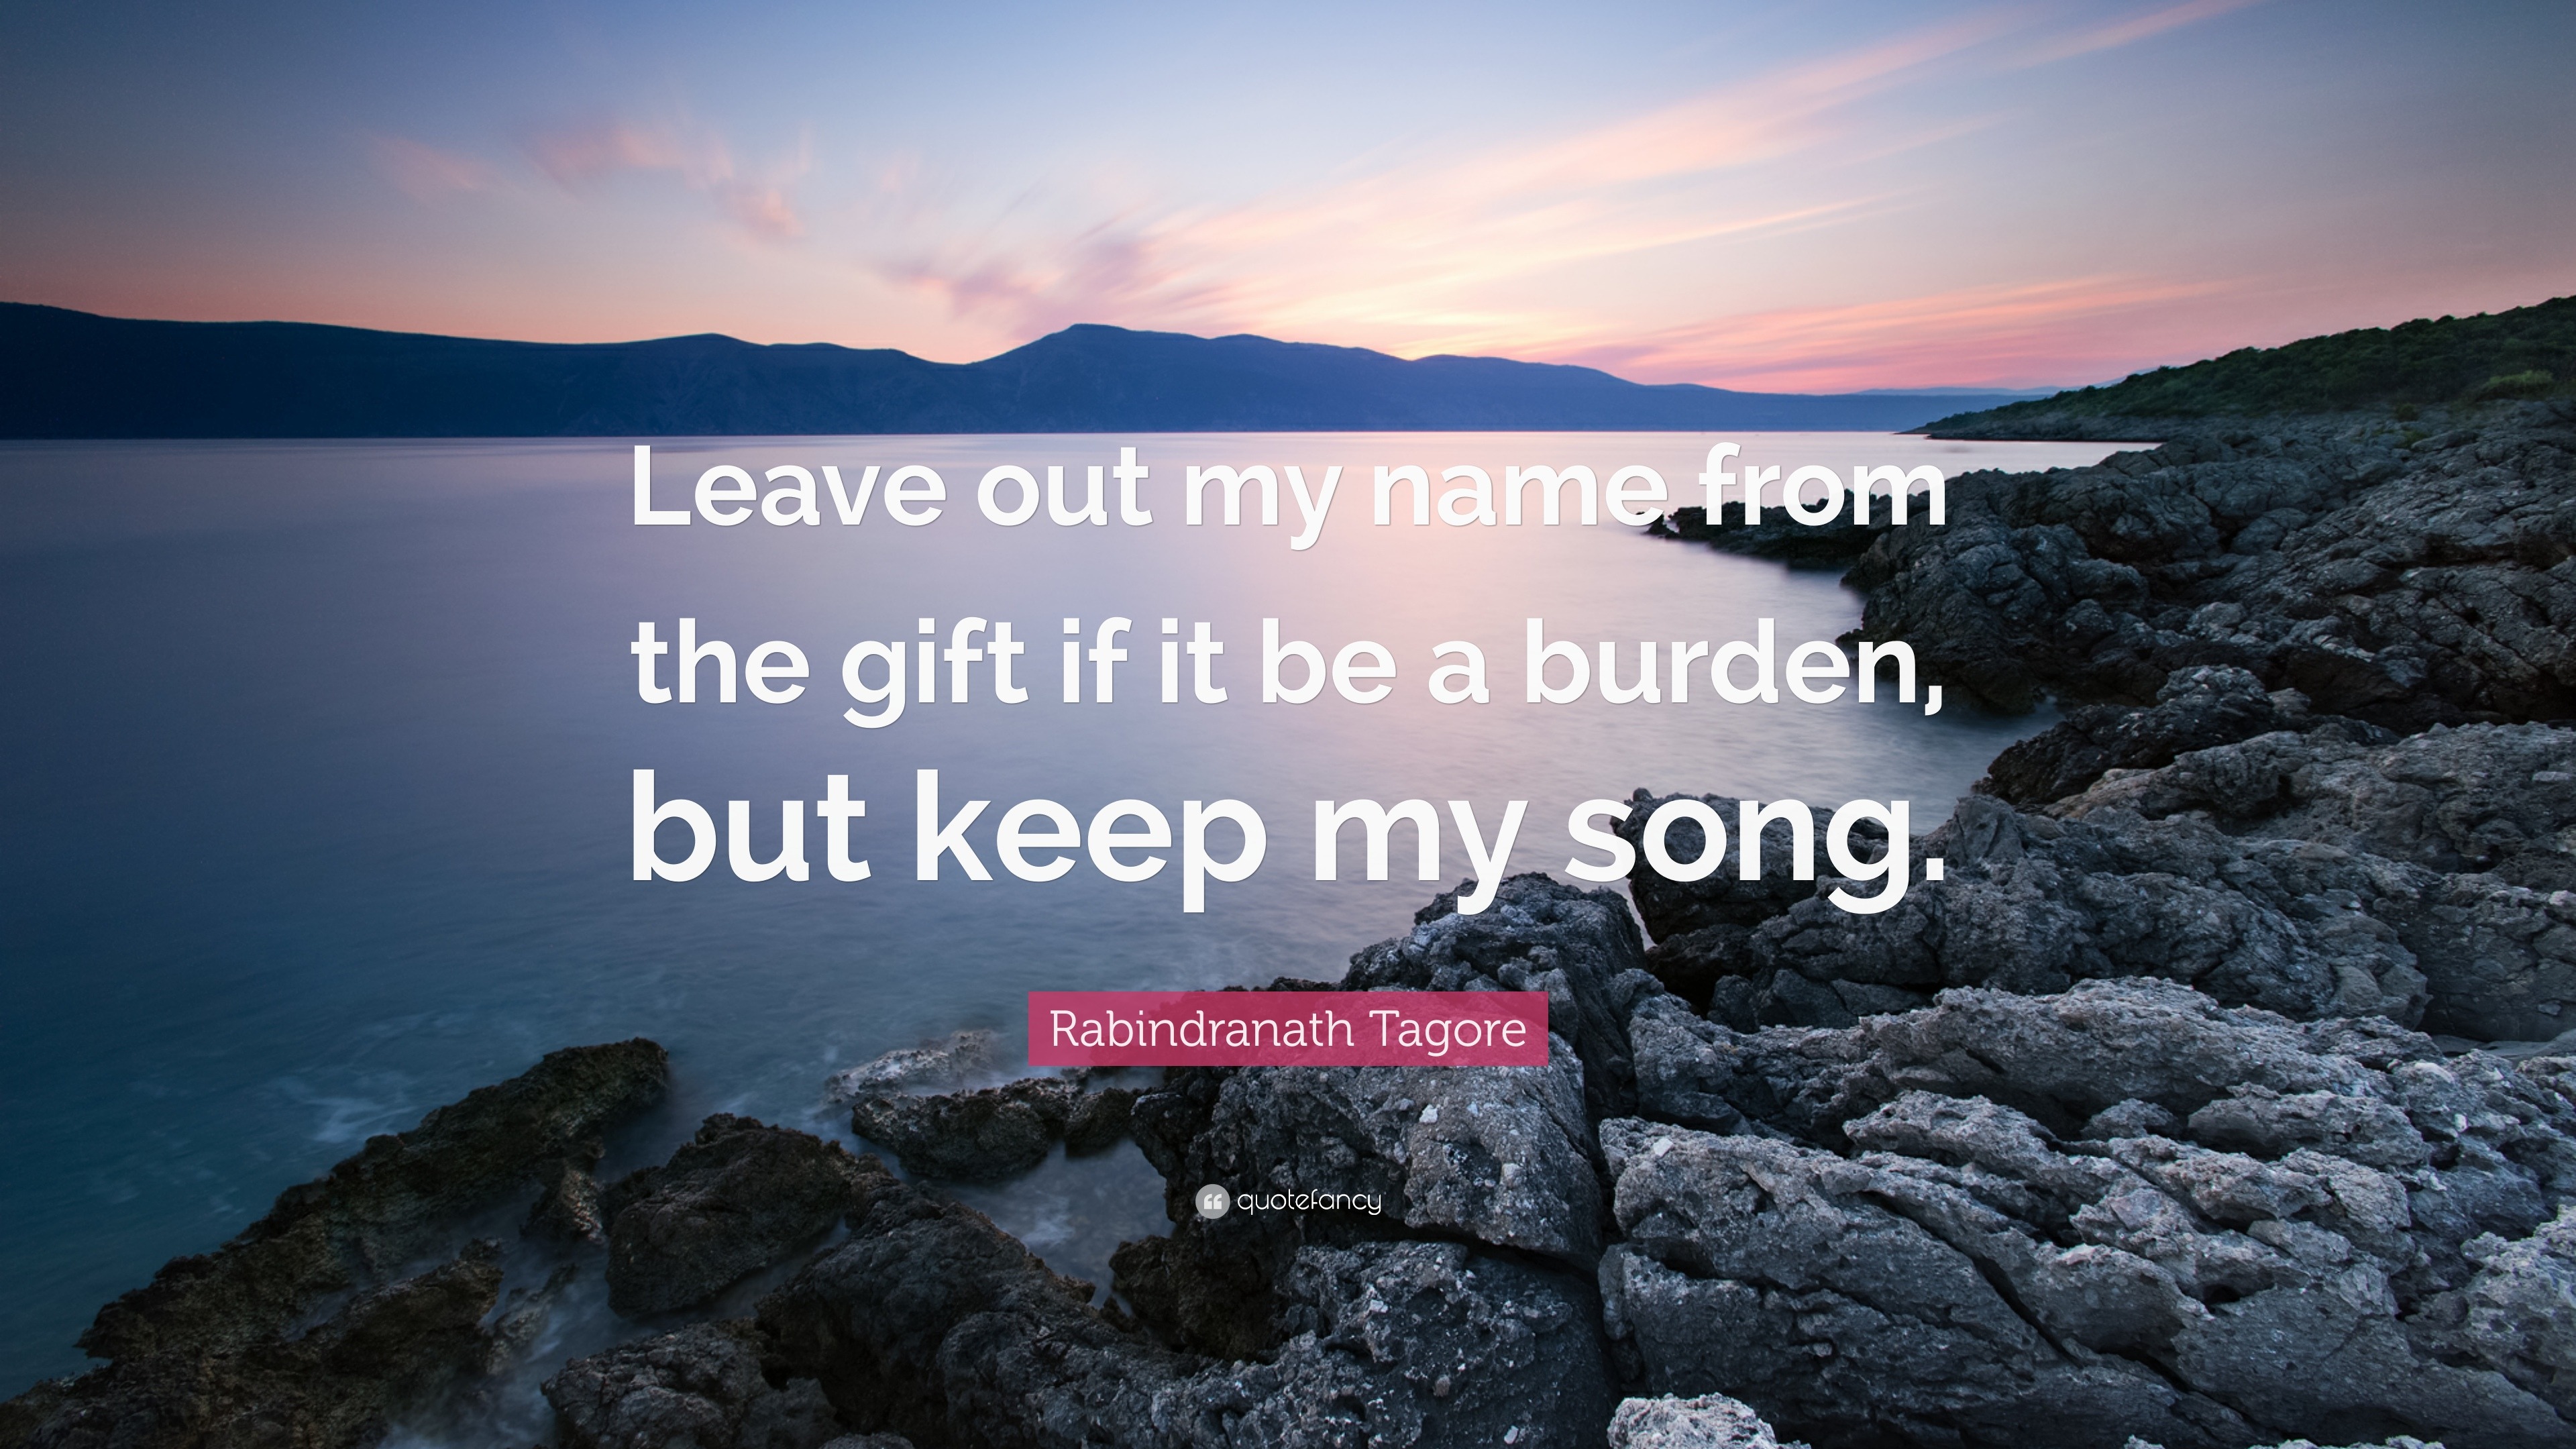 FOR THE GIFT OF CREATION | Digital Songs & Hymns